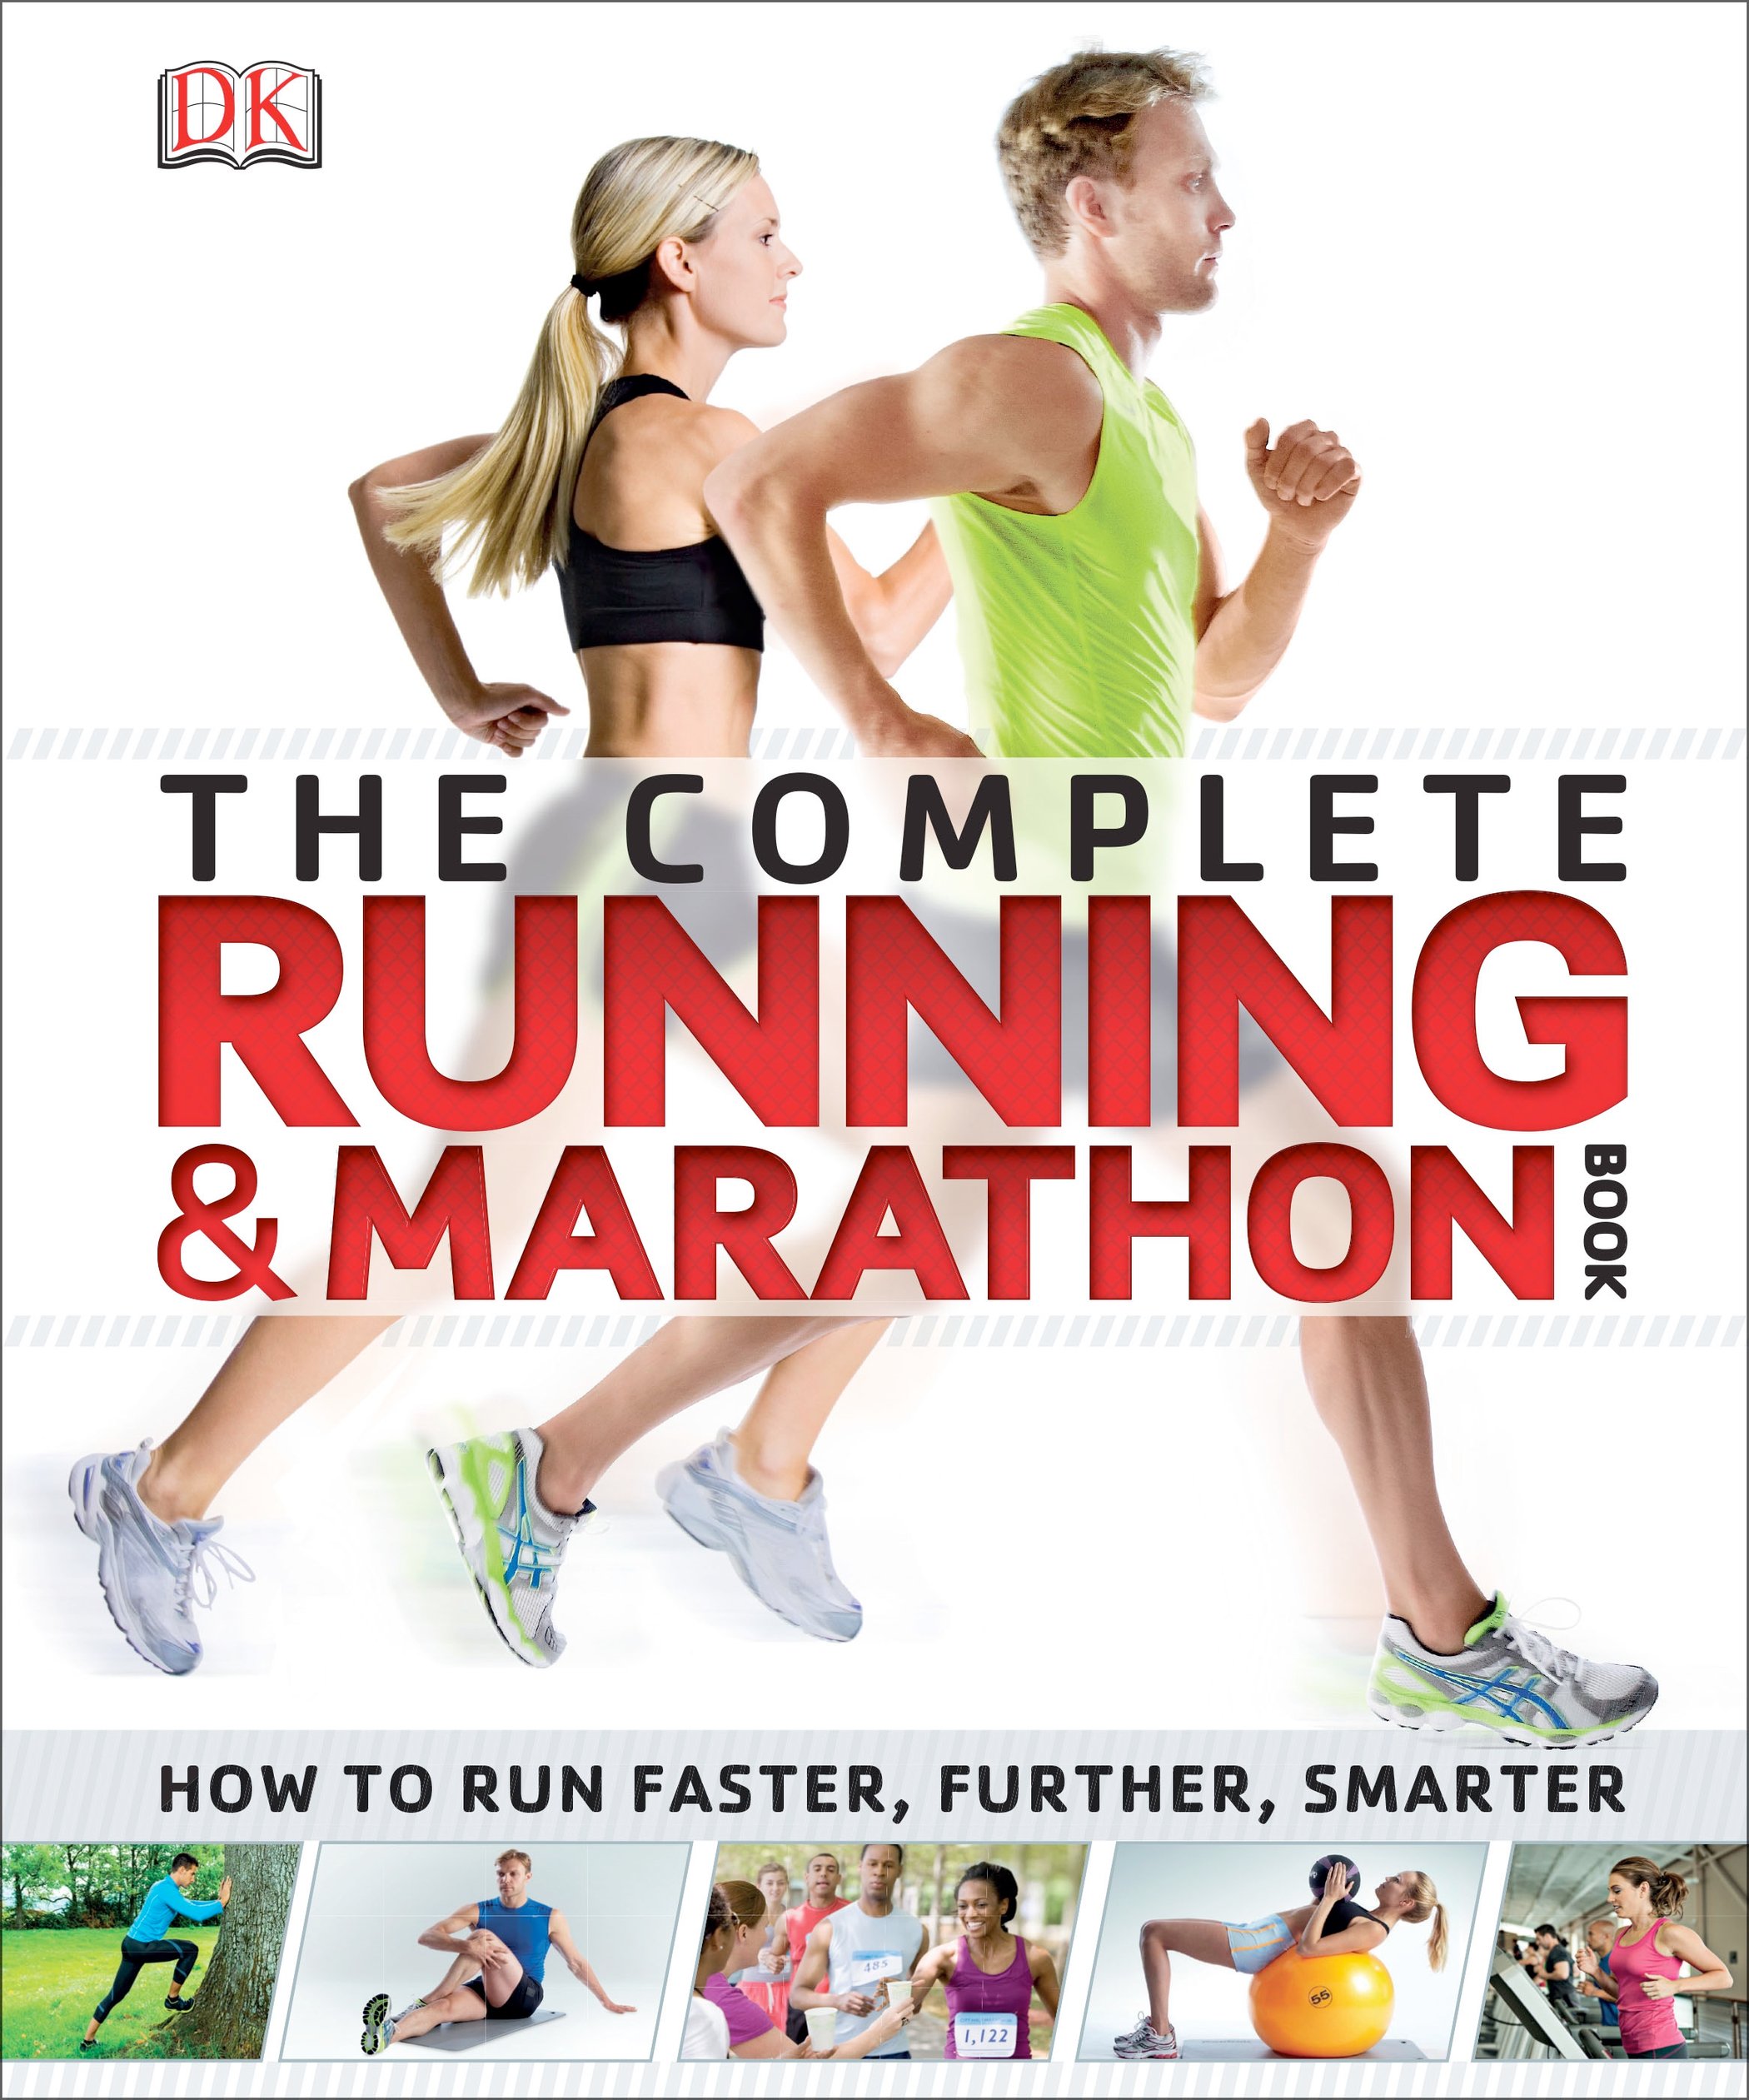 The Complete Running and Marathon Book and